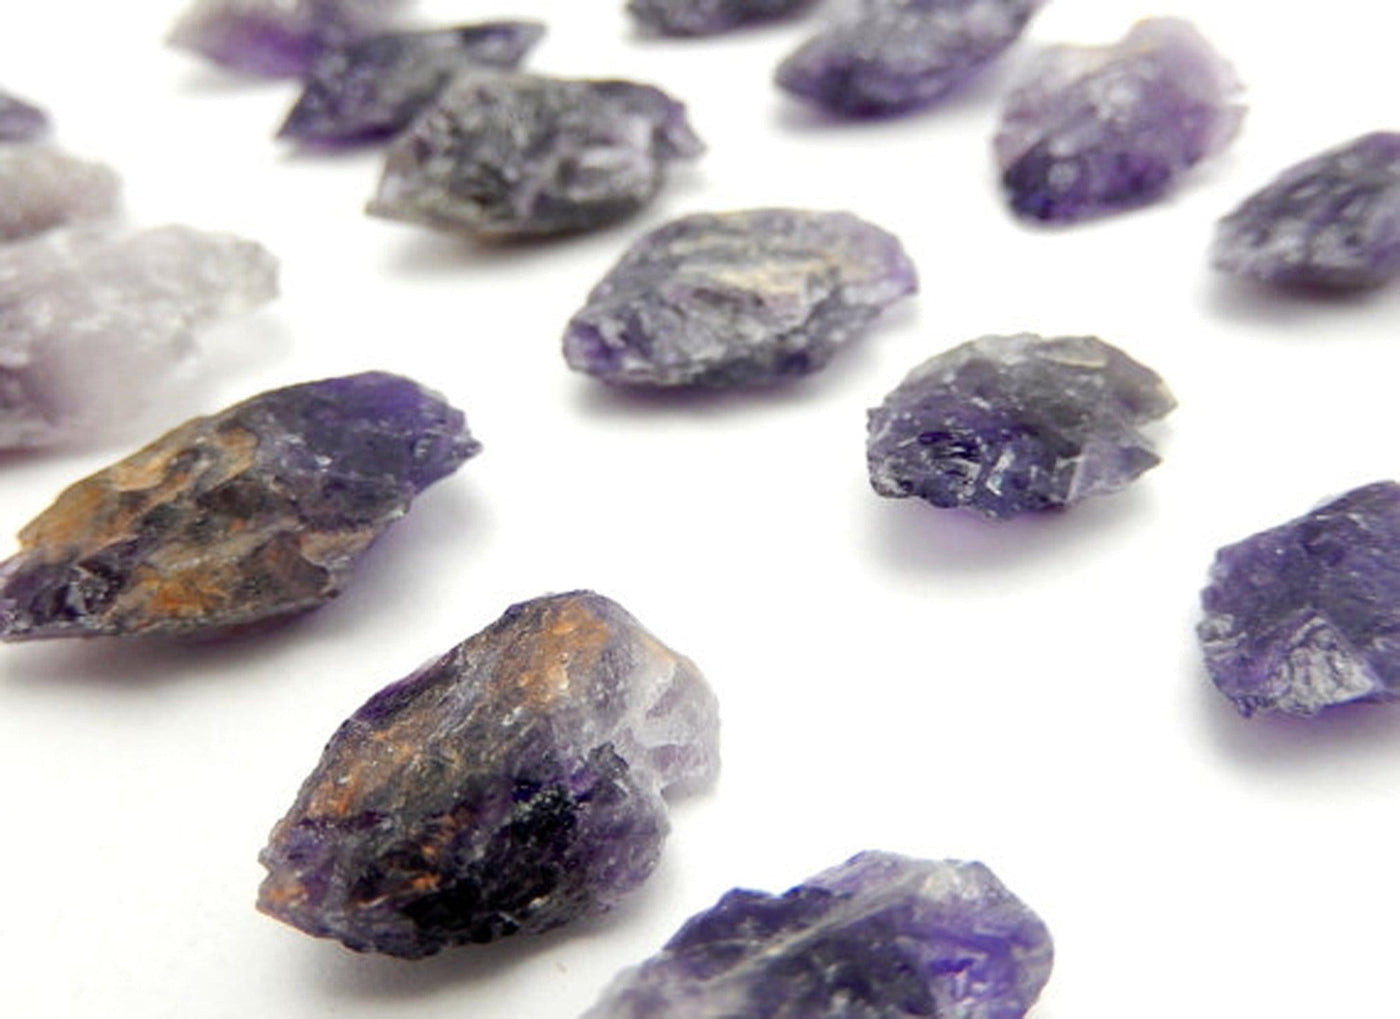 Picture of amethyst arrowheads displayed on a white back ground.